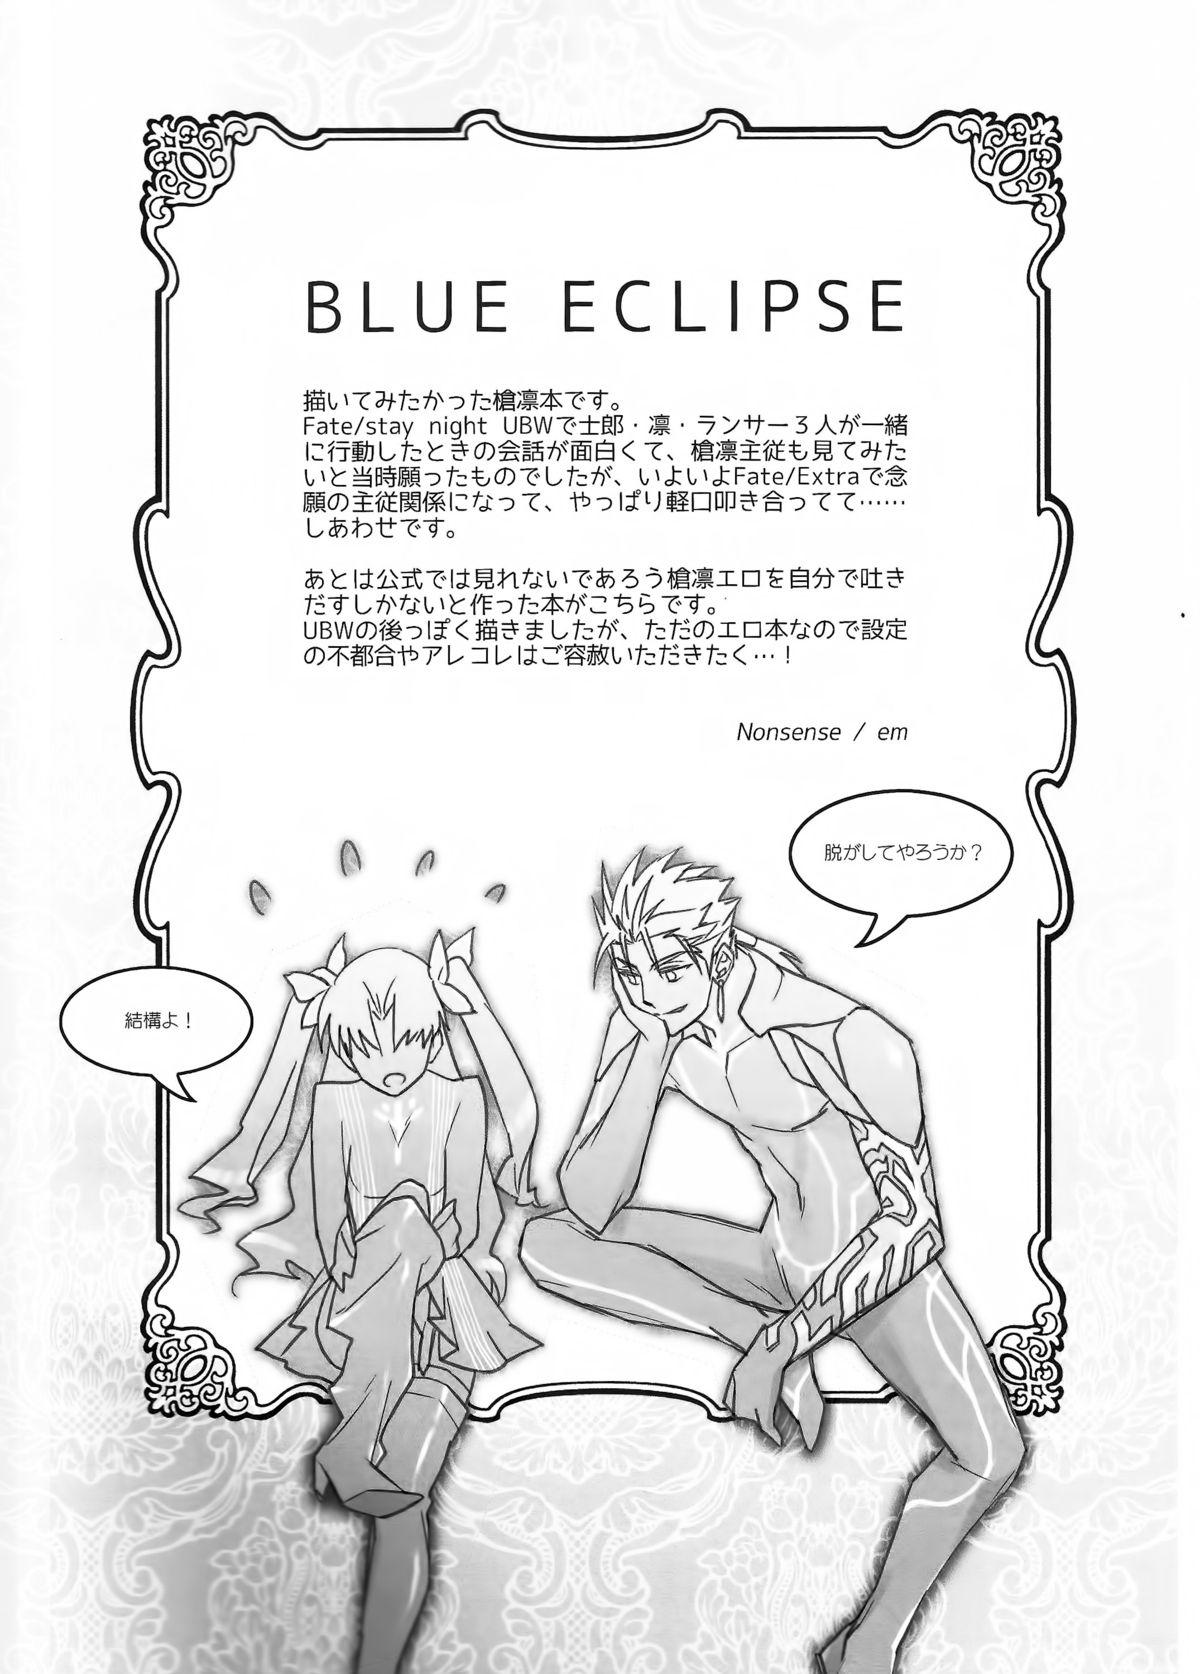 Blackdick BLUE ECLIPSE - Fate stay night Lezbi - Page 2